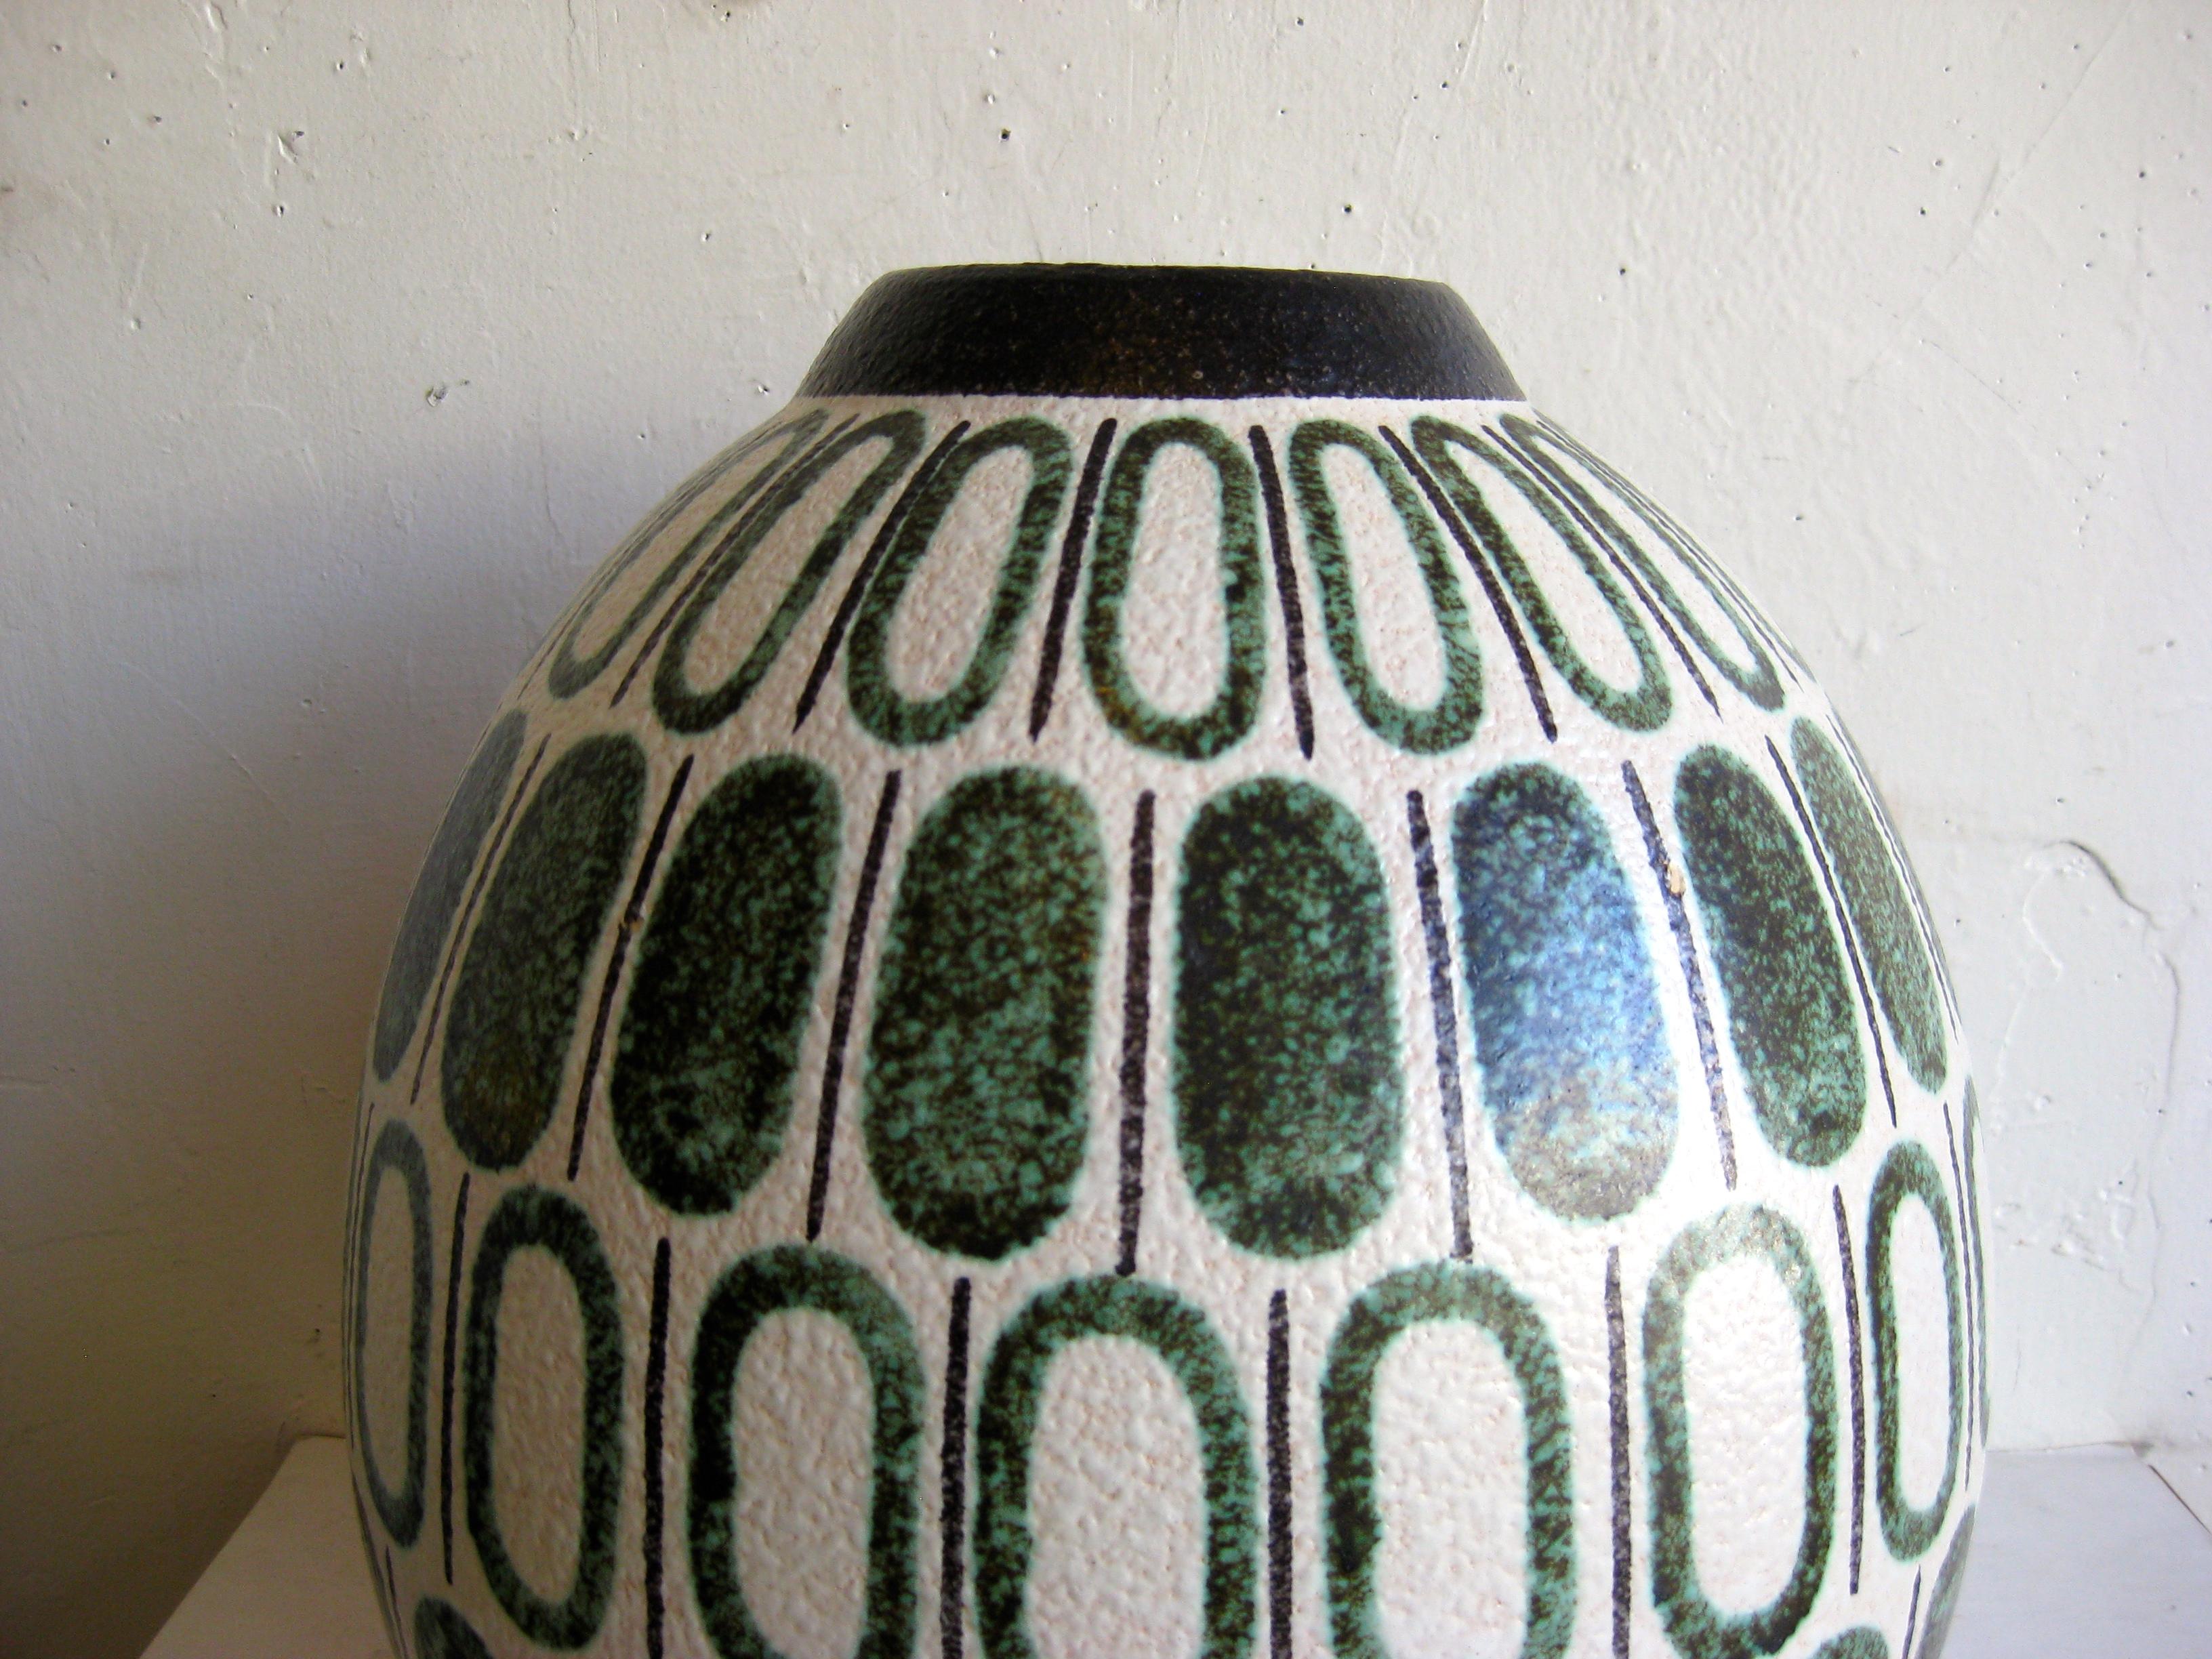 Monumental 1960s Ruscha Studio ceramic pottery vase made in West Germany. Stunning form and colors. Colors are black, green and an off-white. Has a textured finish and is signed on the bottom. In excellent shape with no chips, no cracks and no